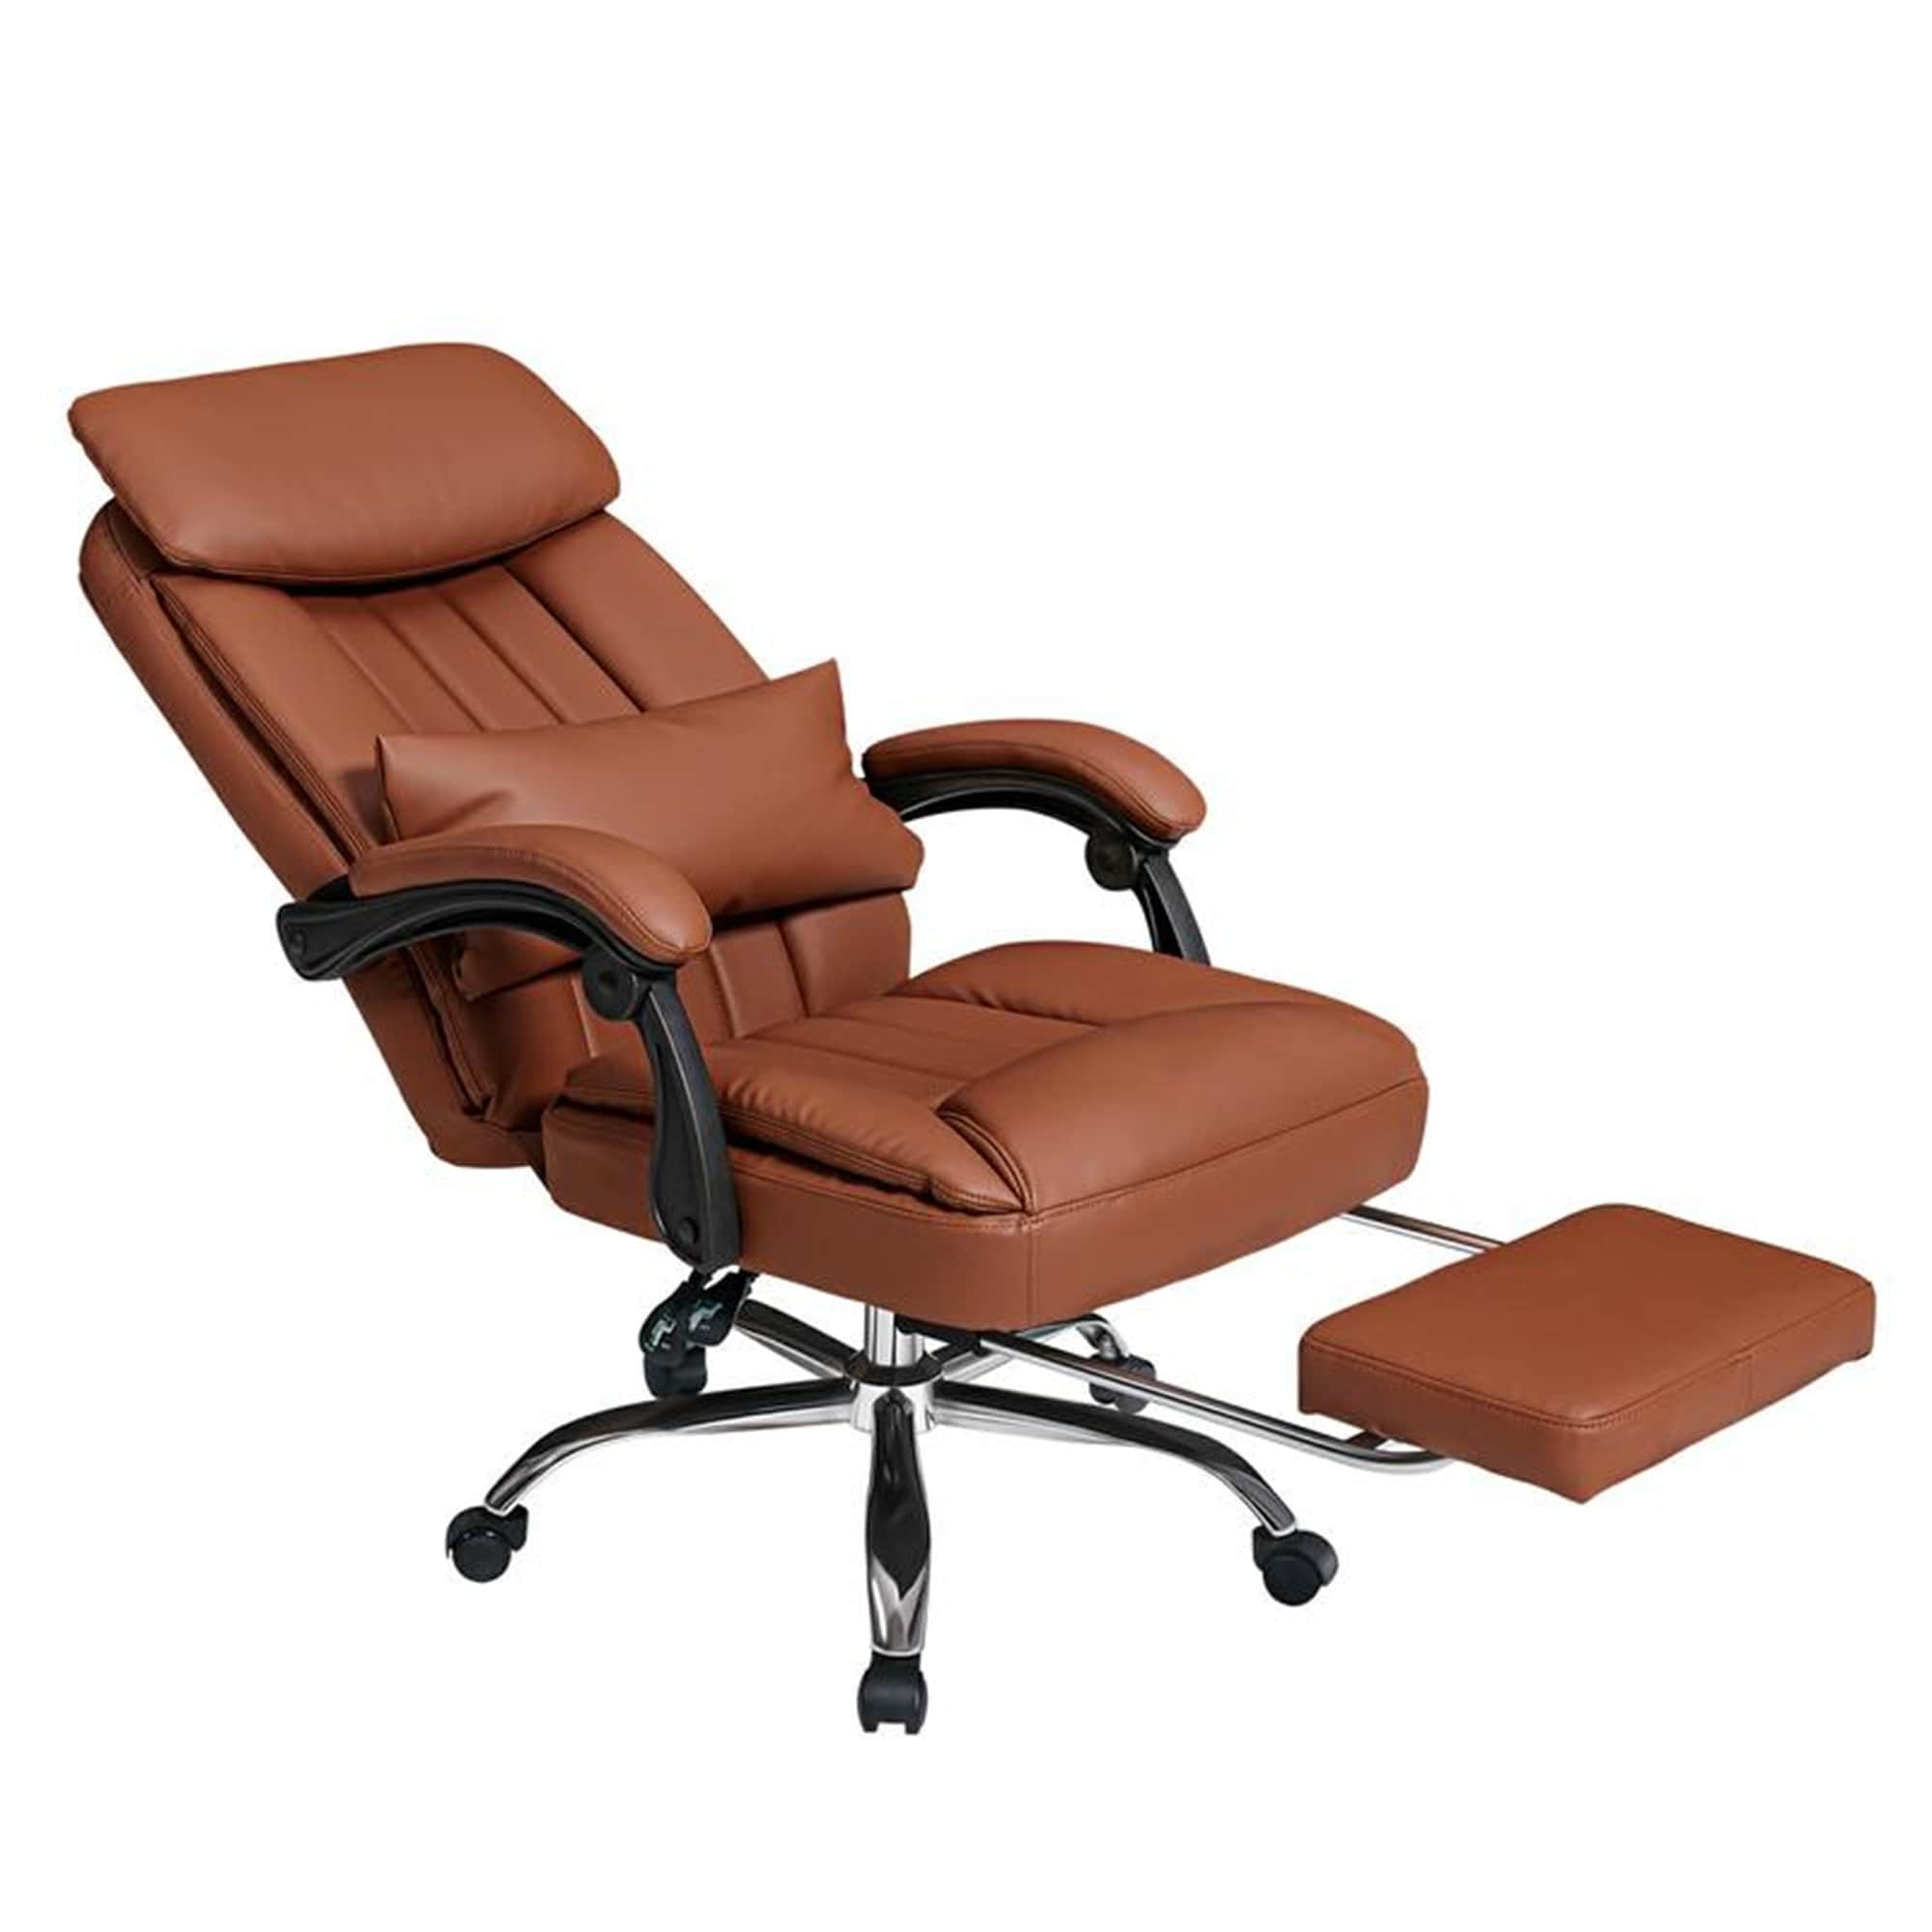 Executive Chair, High Back Leather Desk Chair W/ Retractable